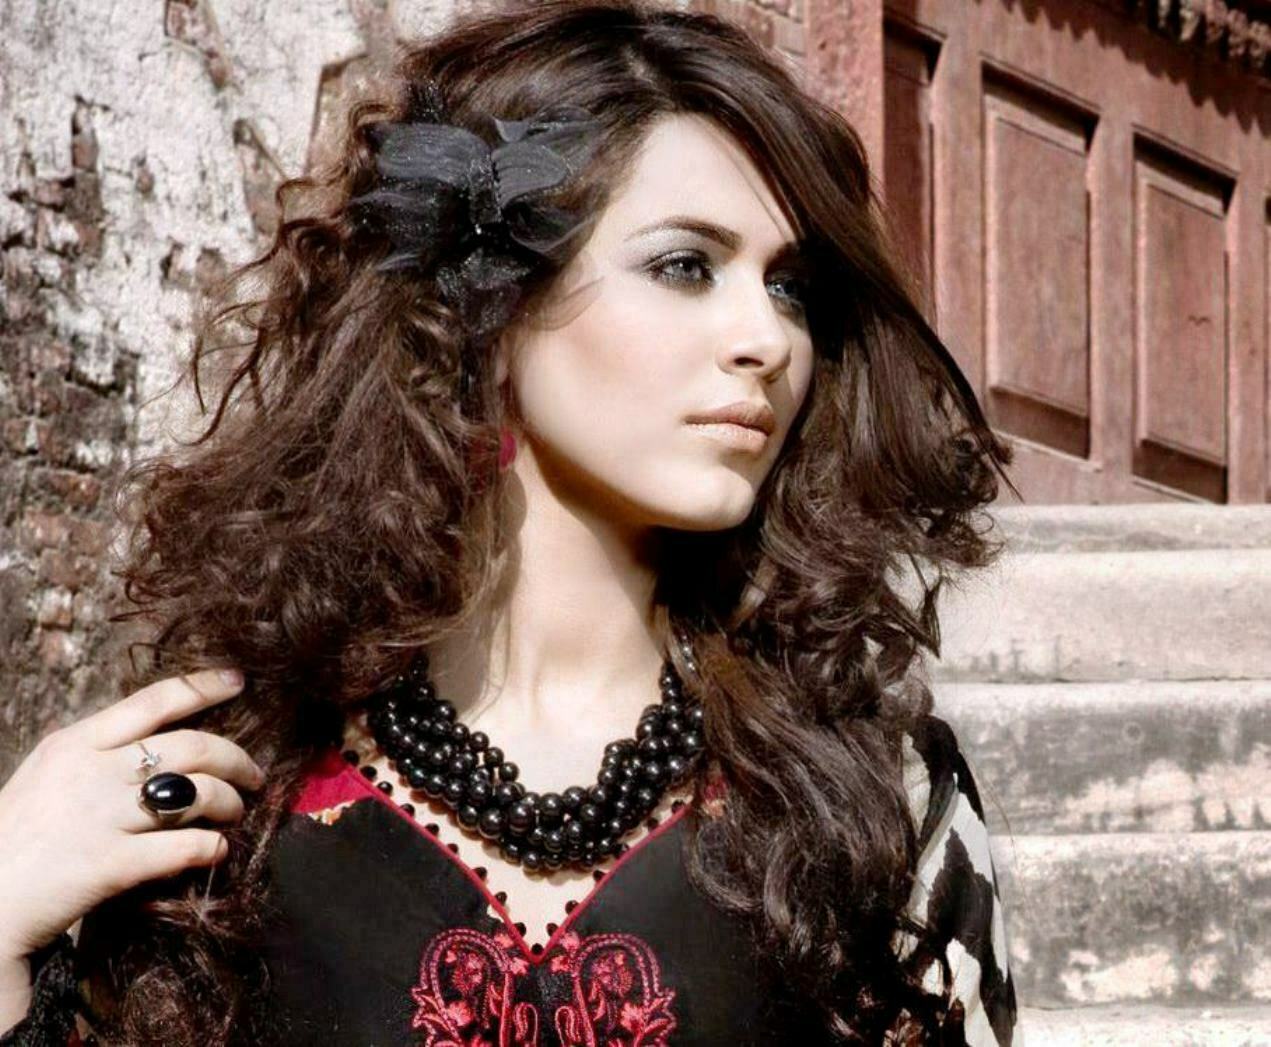 Pakistani Model Ayyan Ali hot Latest Pictures 2022 Gallery.